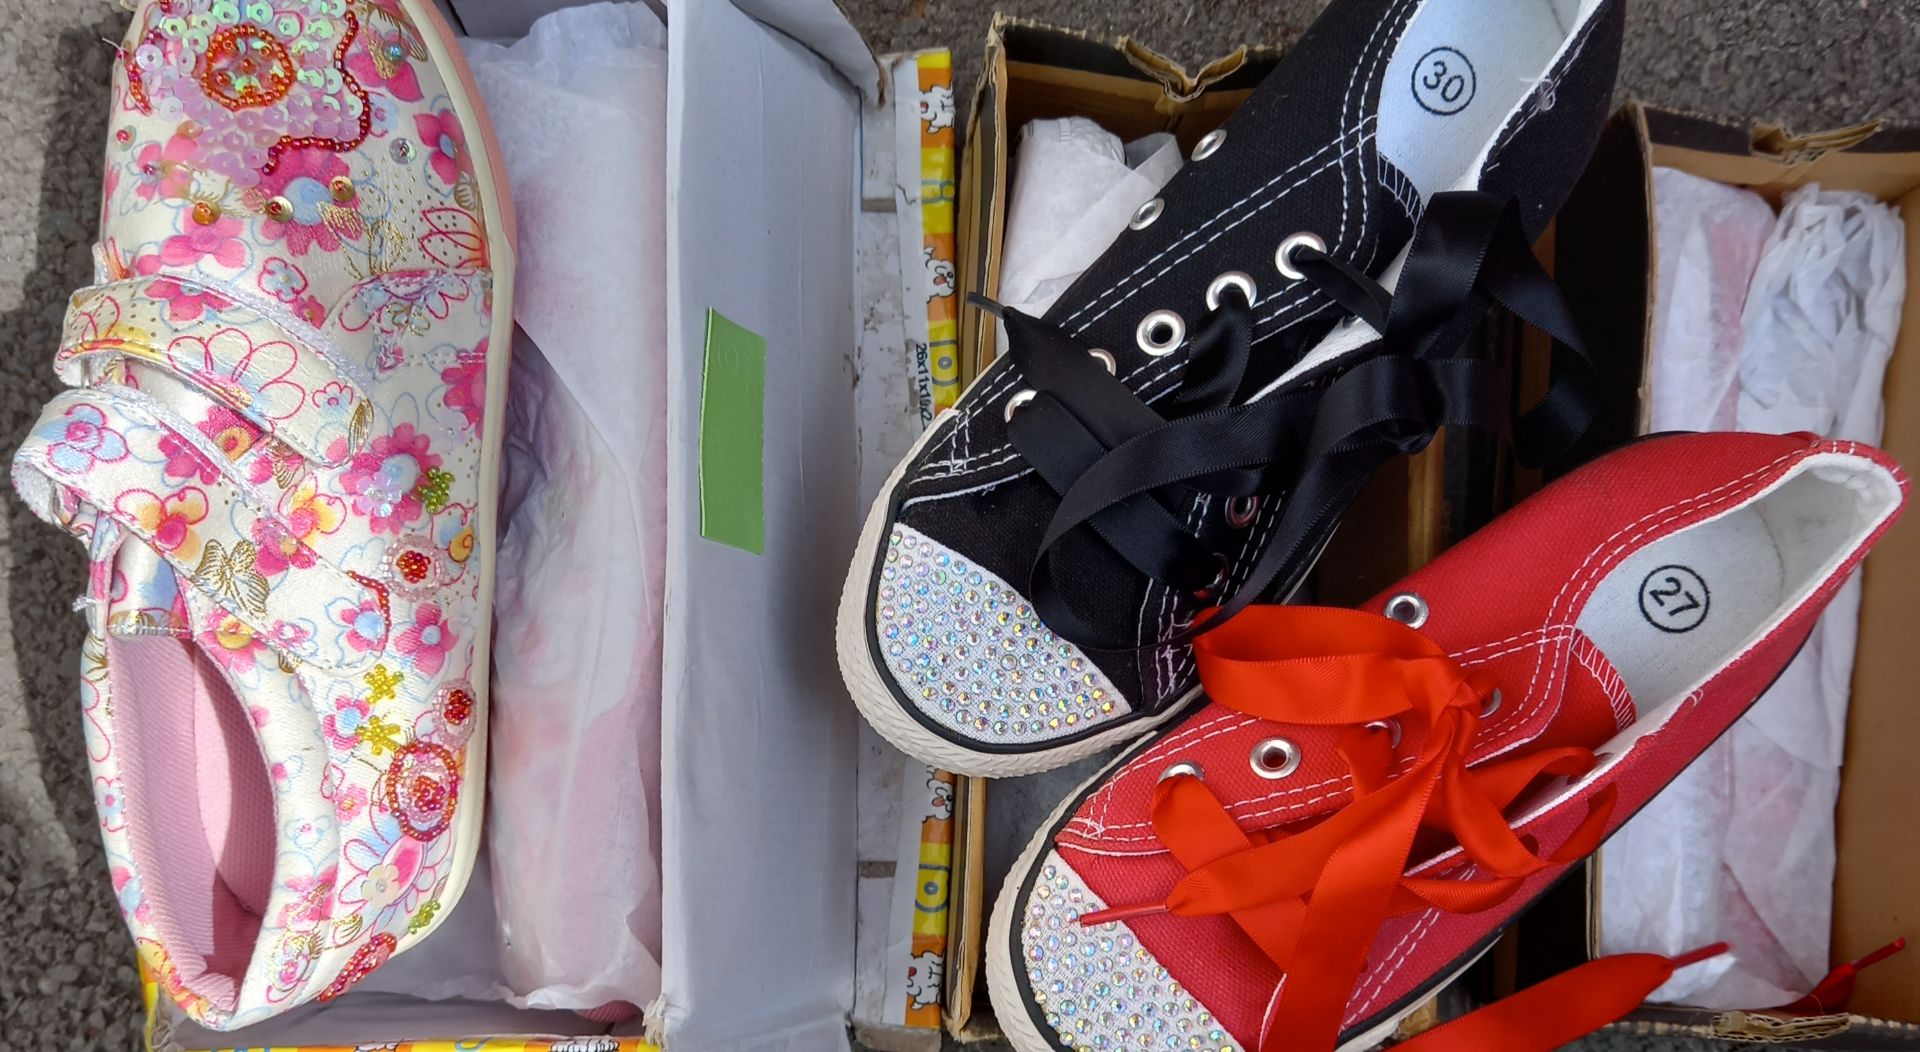 3 brand new pairs of children's shoes.